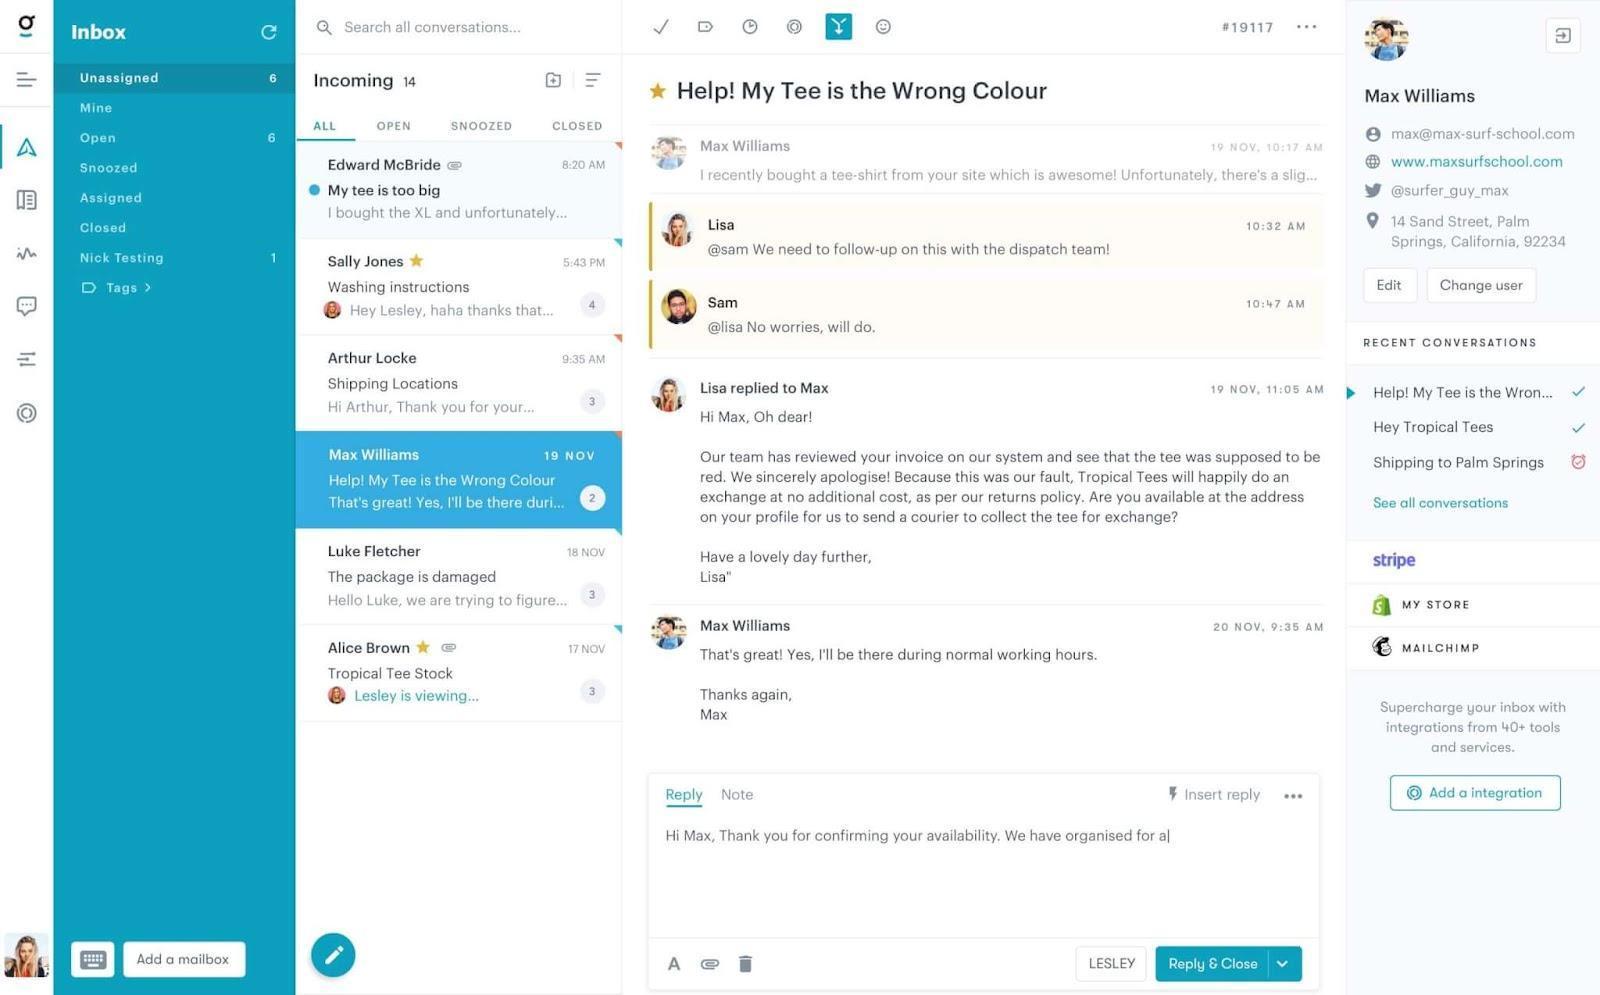 Groove customer service tool that also allows to manage shared email inbox.